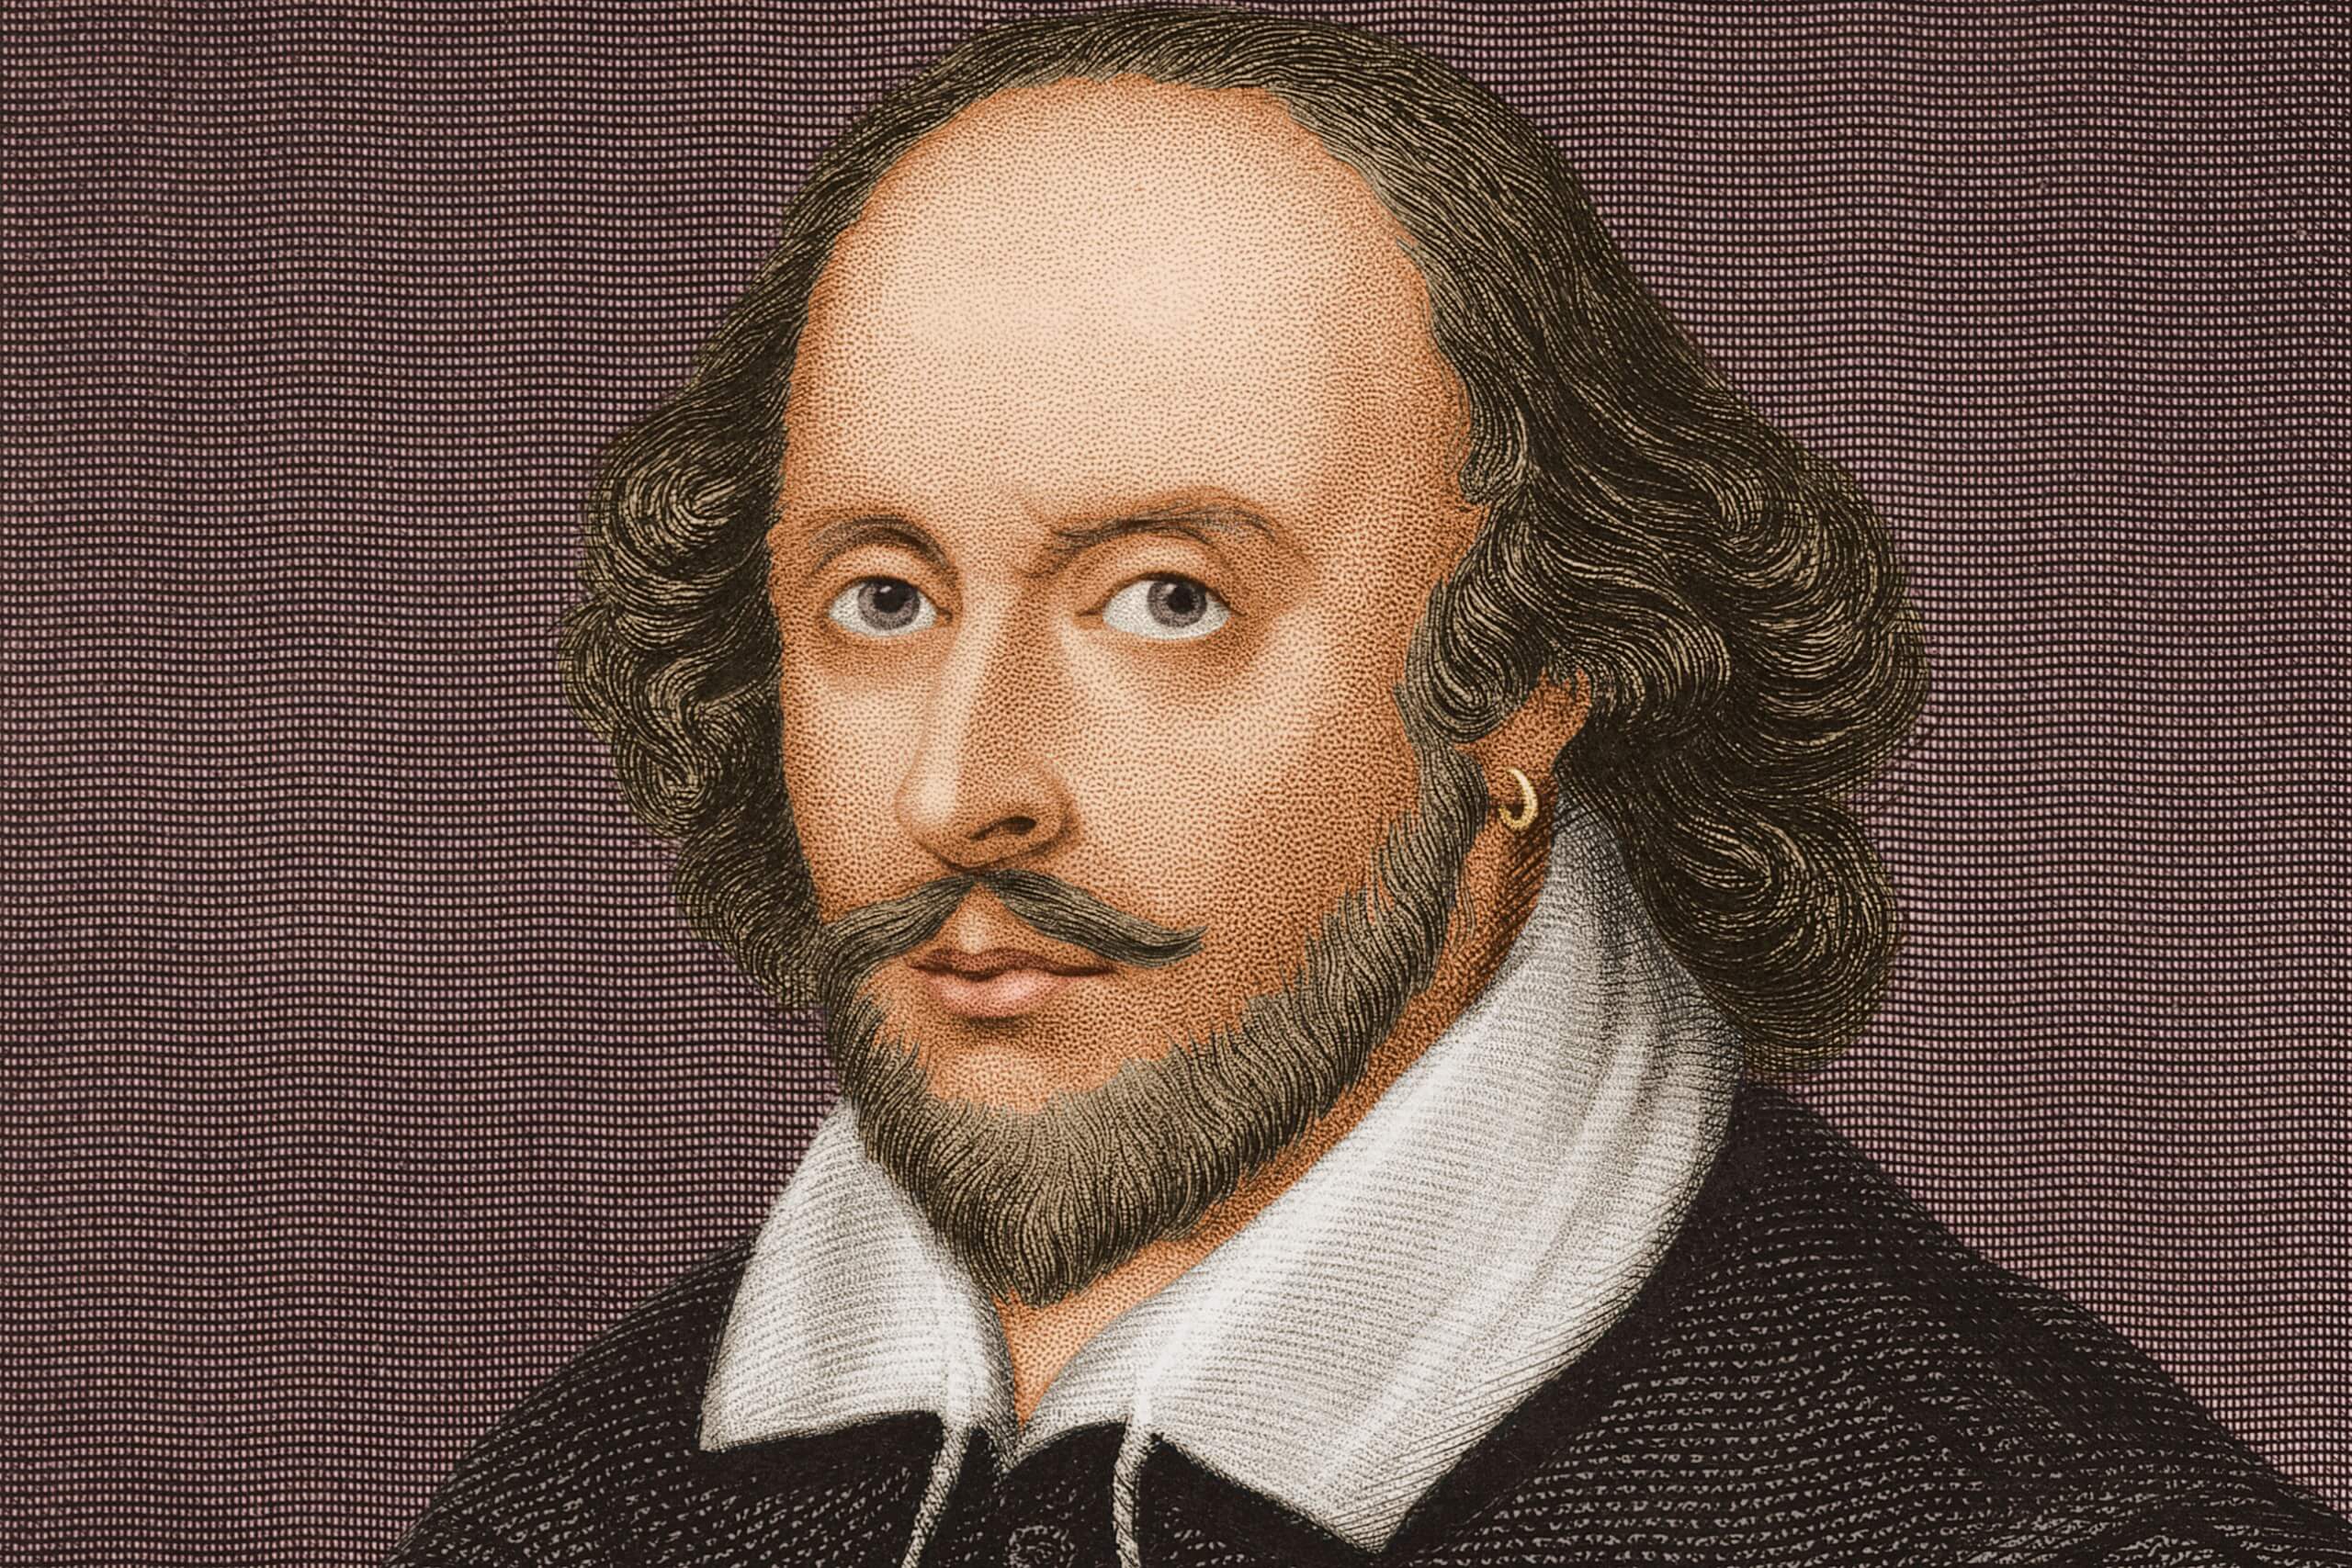 Someone just tweeted the entire works of Shakespeare with one tweet